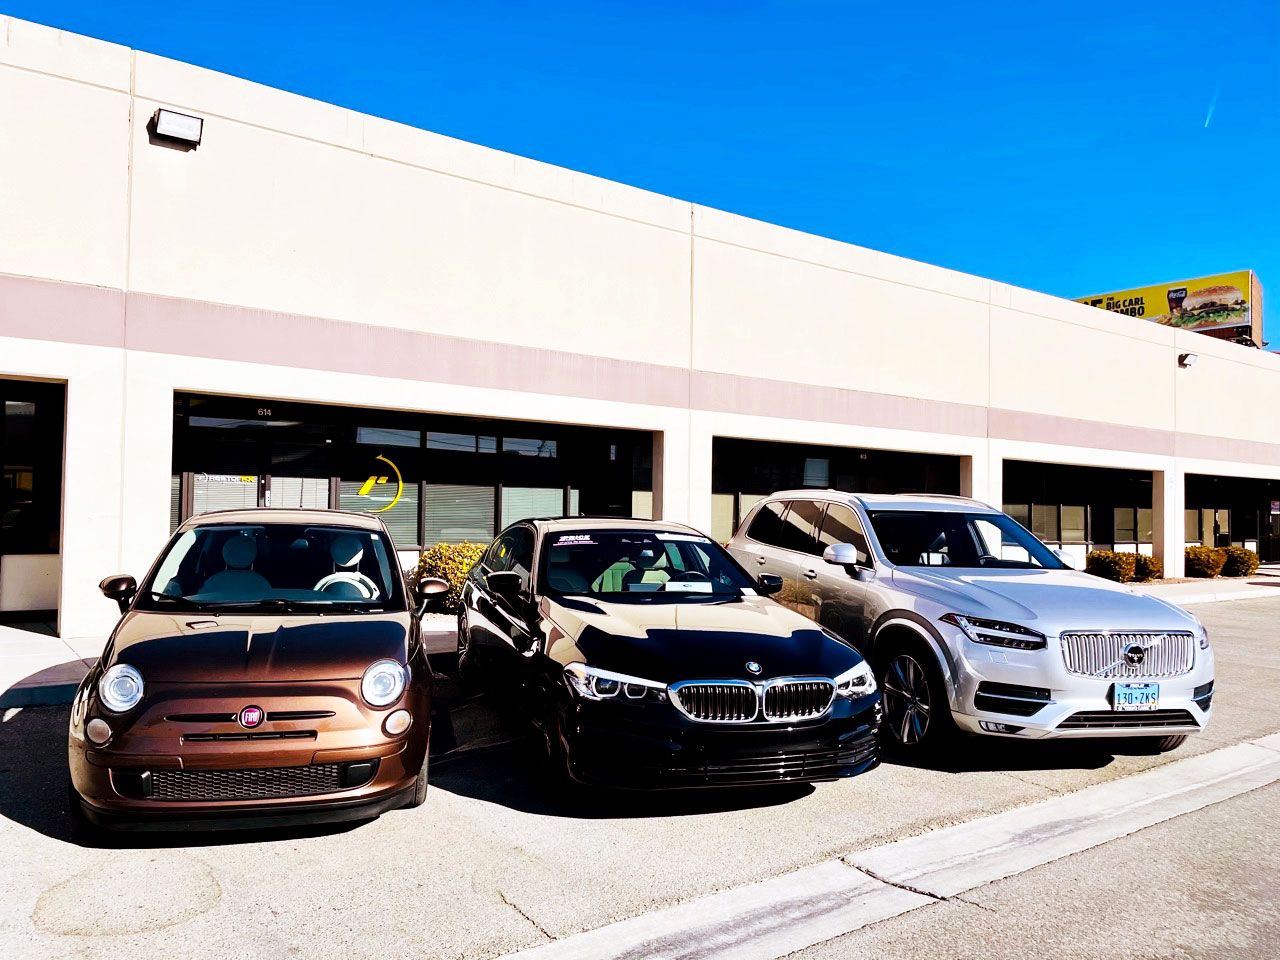 Shiny Fiat, BMW and Volvo parked in the storefront of the RestorFX Las Vegas on sunny blue-sky day